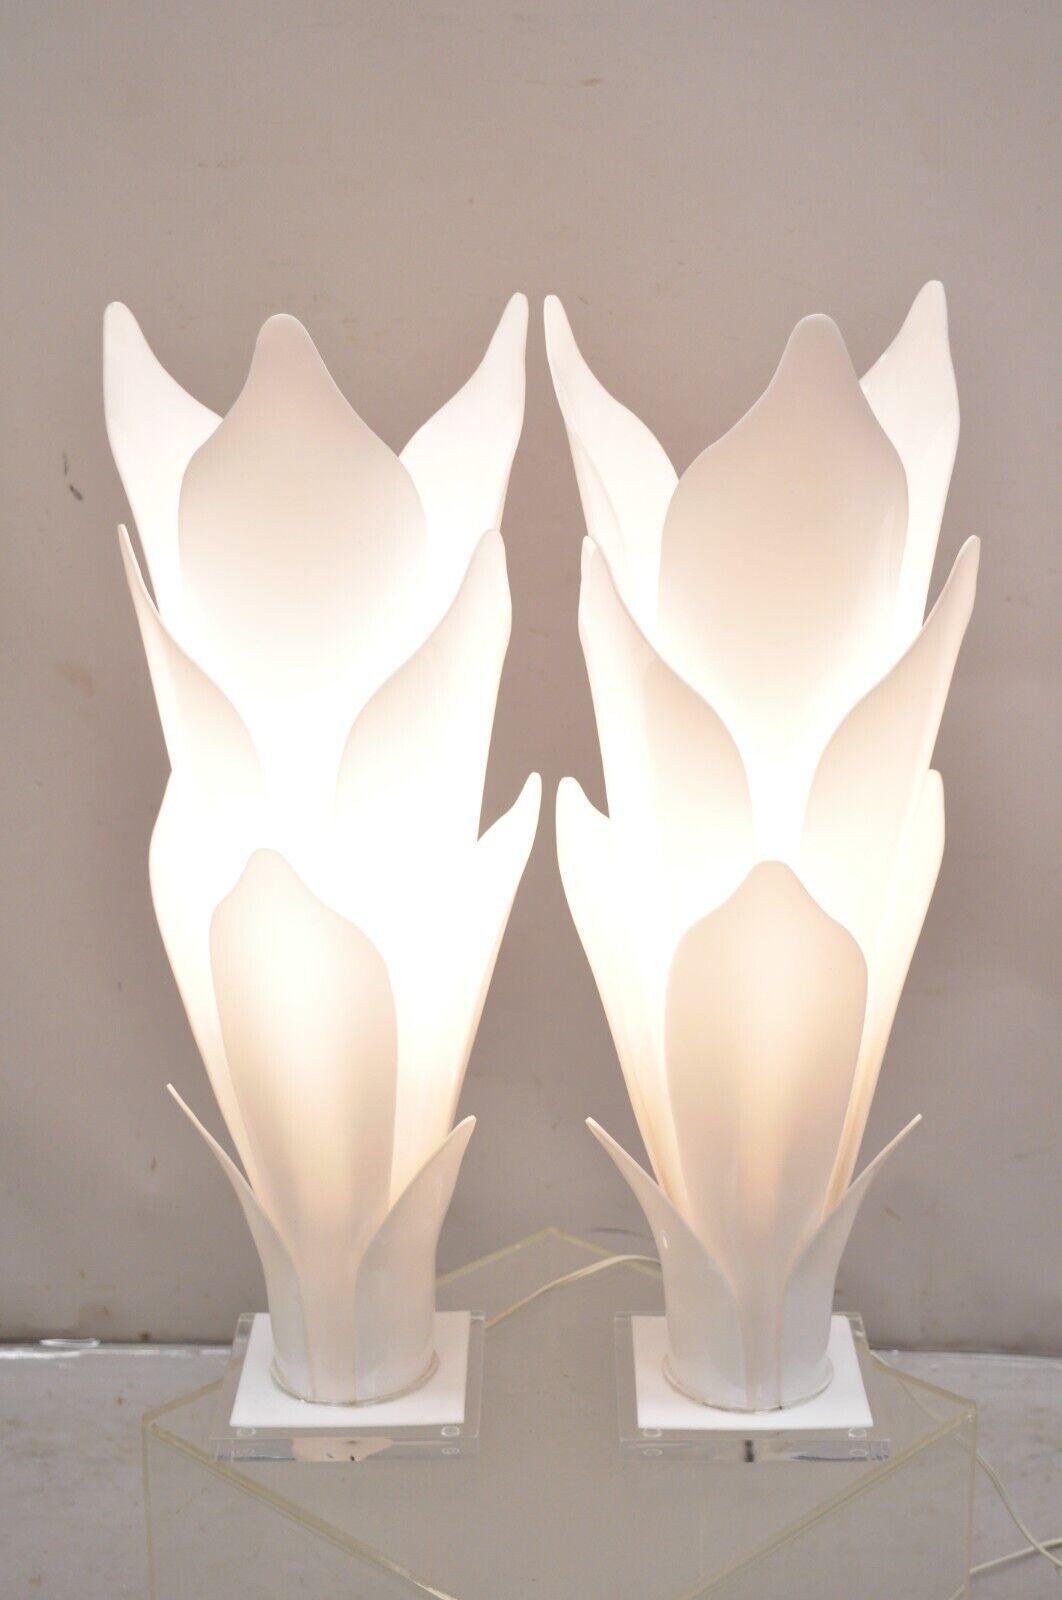 Mid-Century Modern Rougier White Acrylic Lucite Tulip Flower Leaf Mid Century Table Lamps - a Pair For Sale